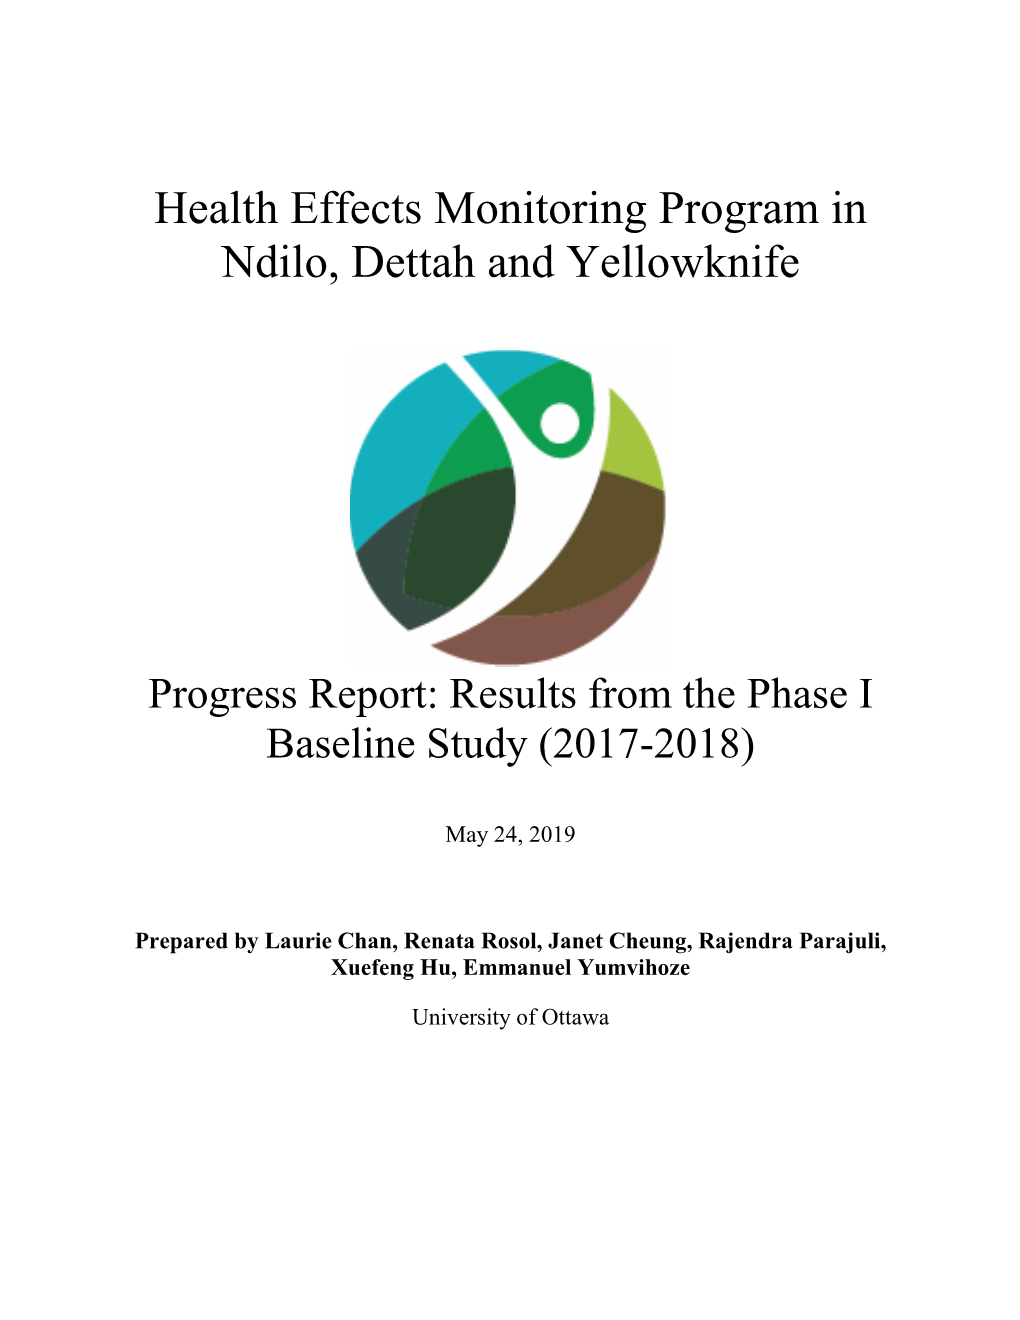 Health Effects Monitoring Program in Ndilo, Dettah and Yellowknife